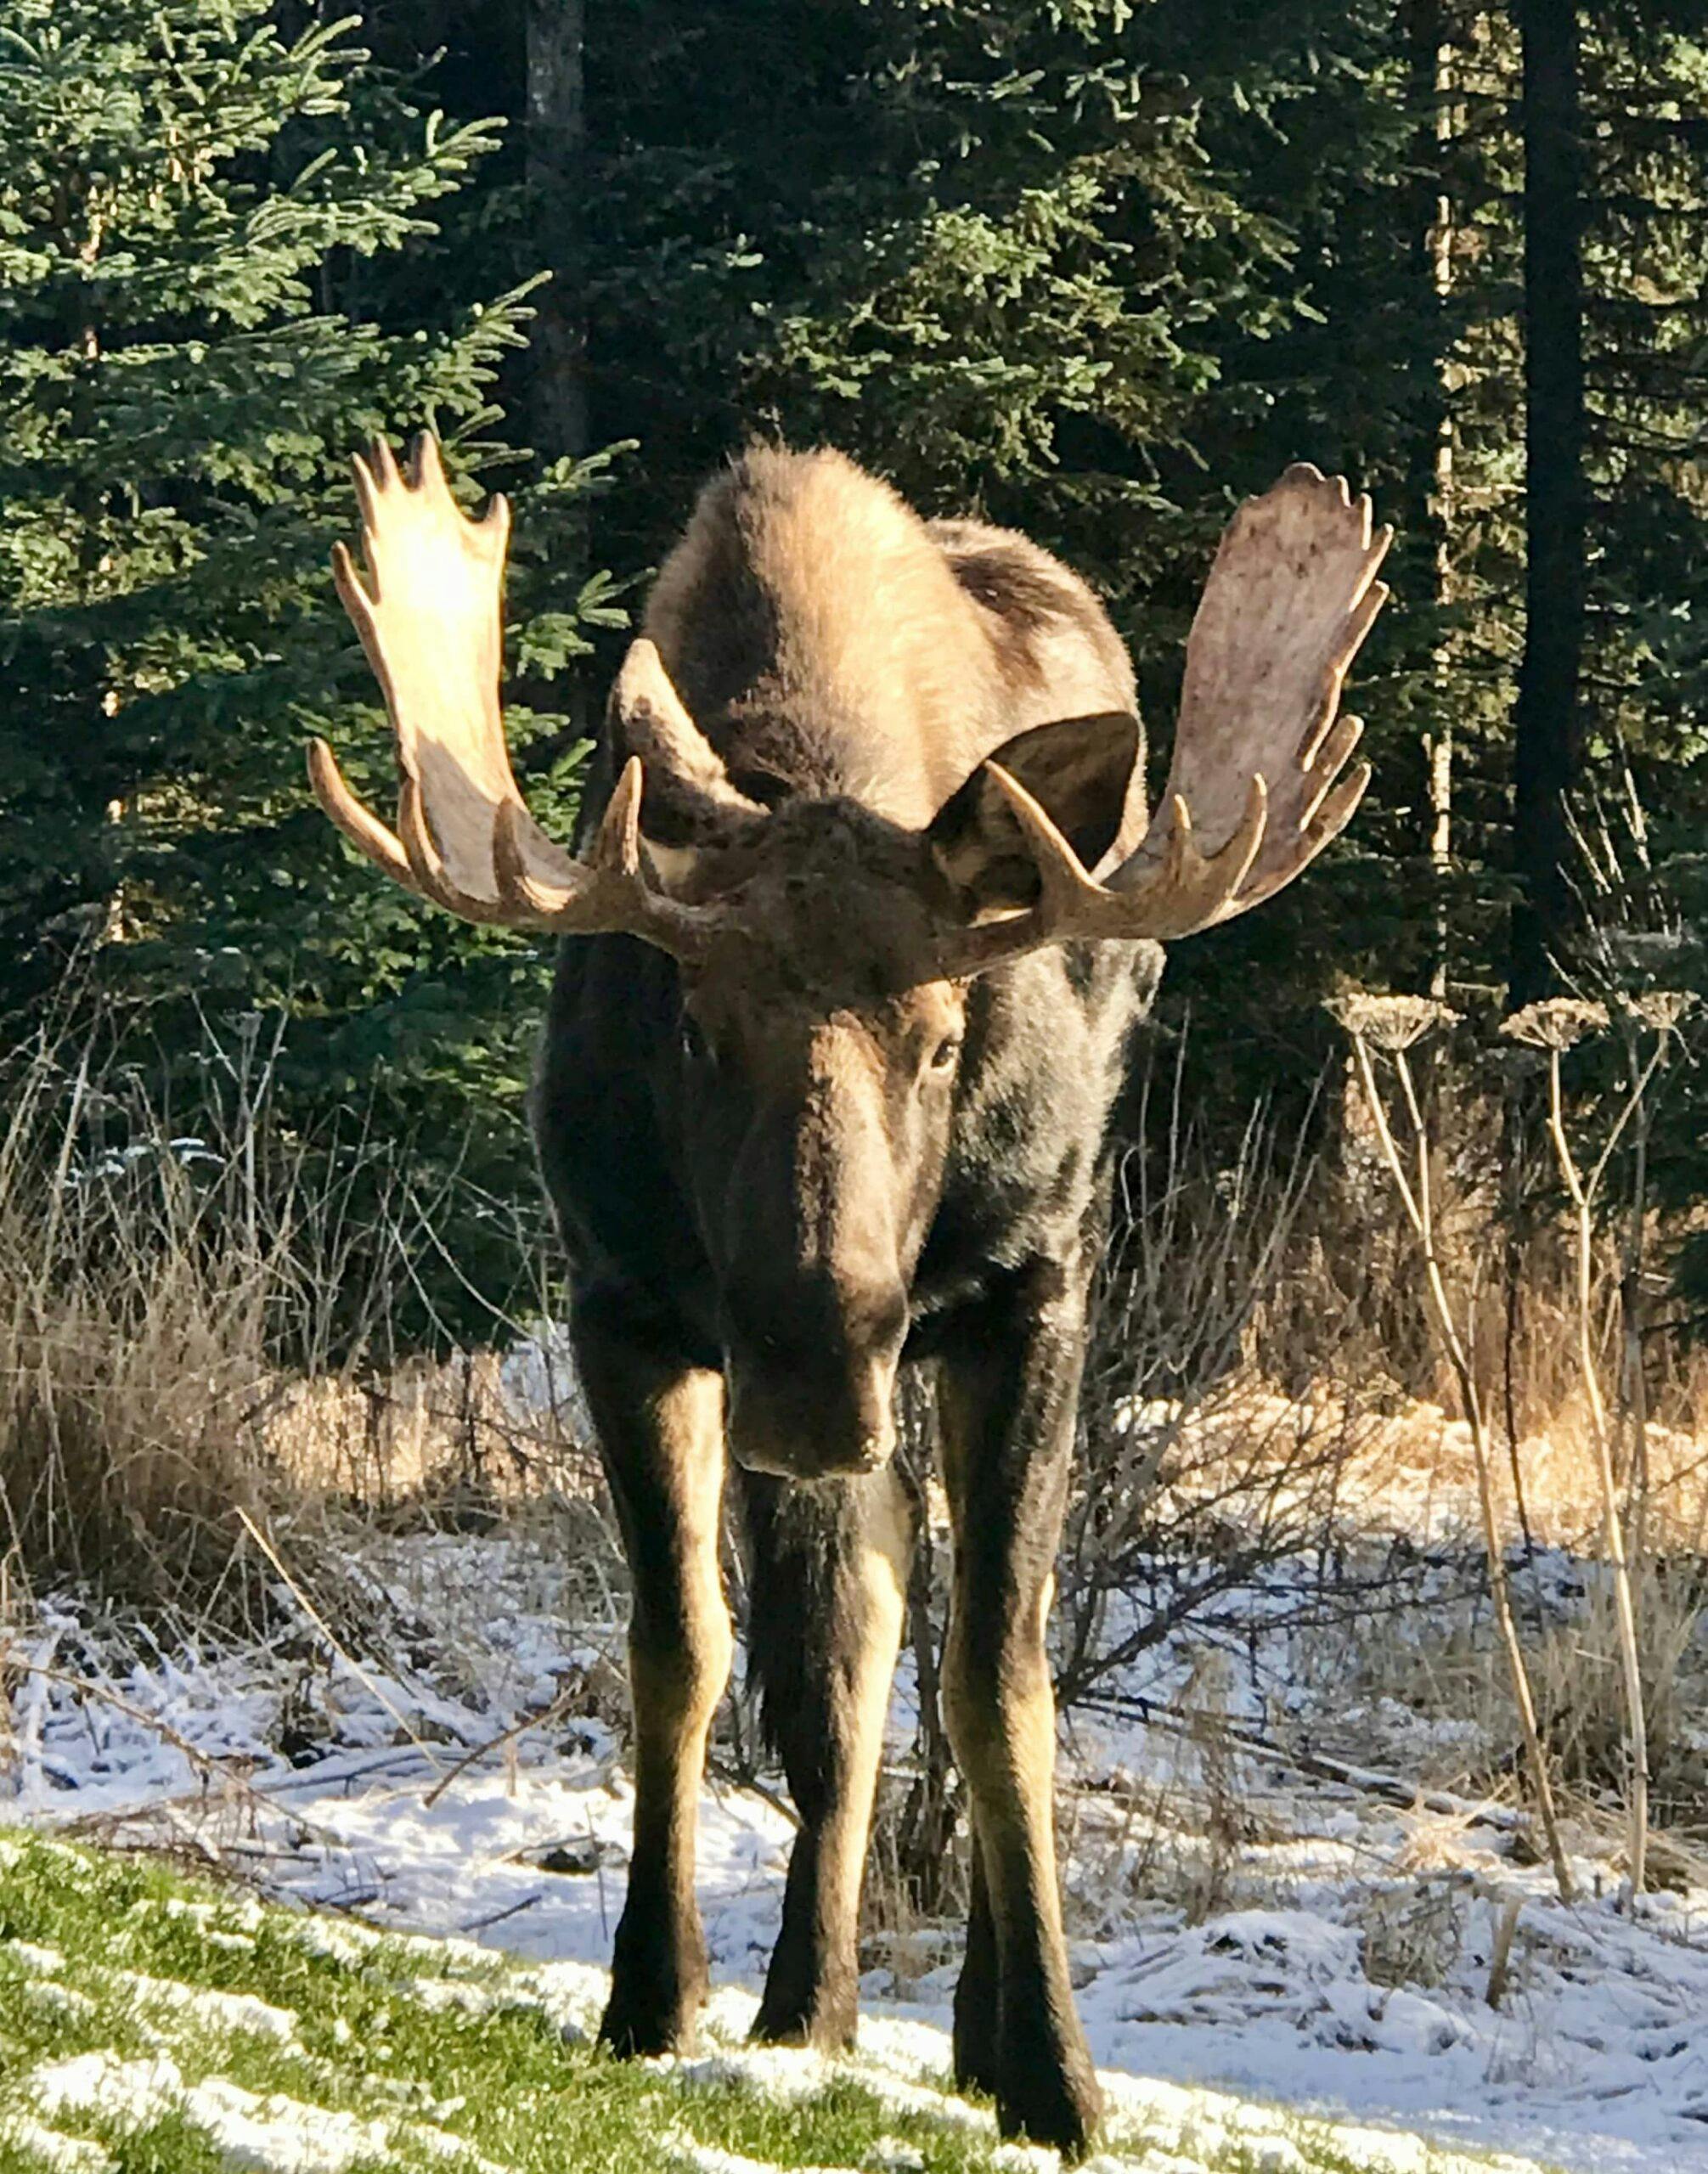 Adult moose with large antlers, standing in woods with some snow on the ground